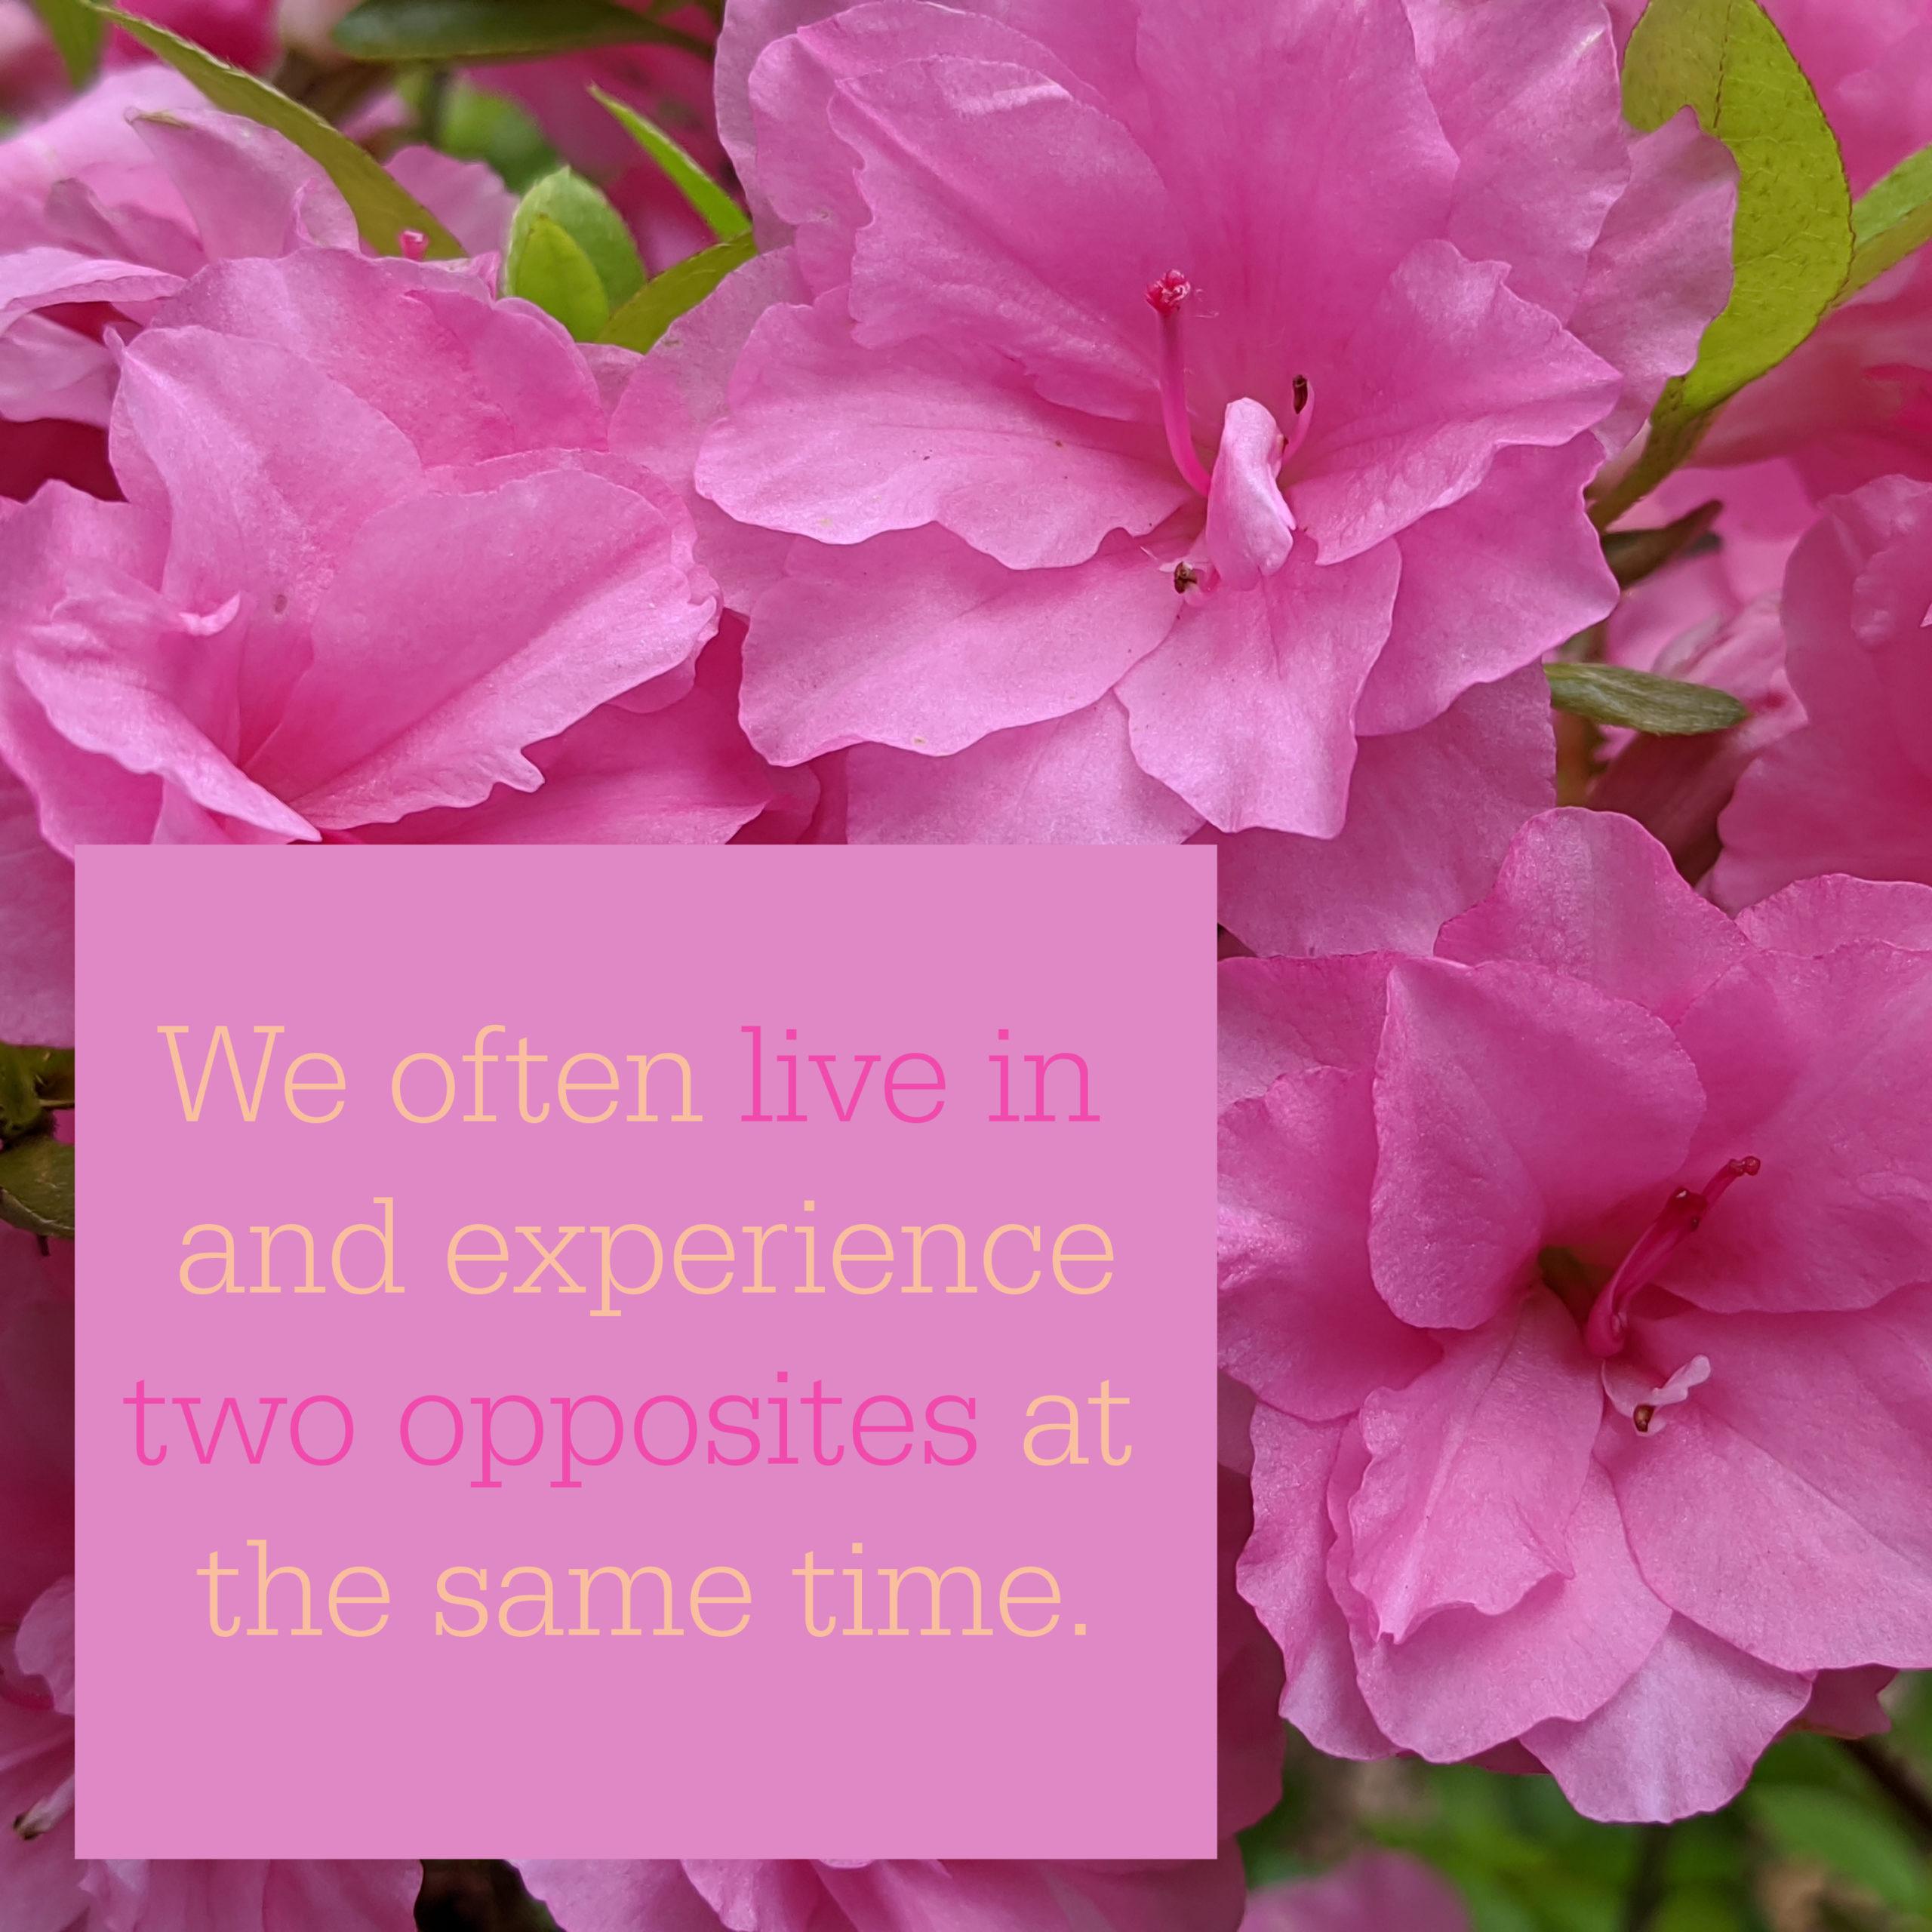 We have the ability to live between and experience two extremes.